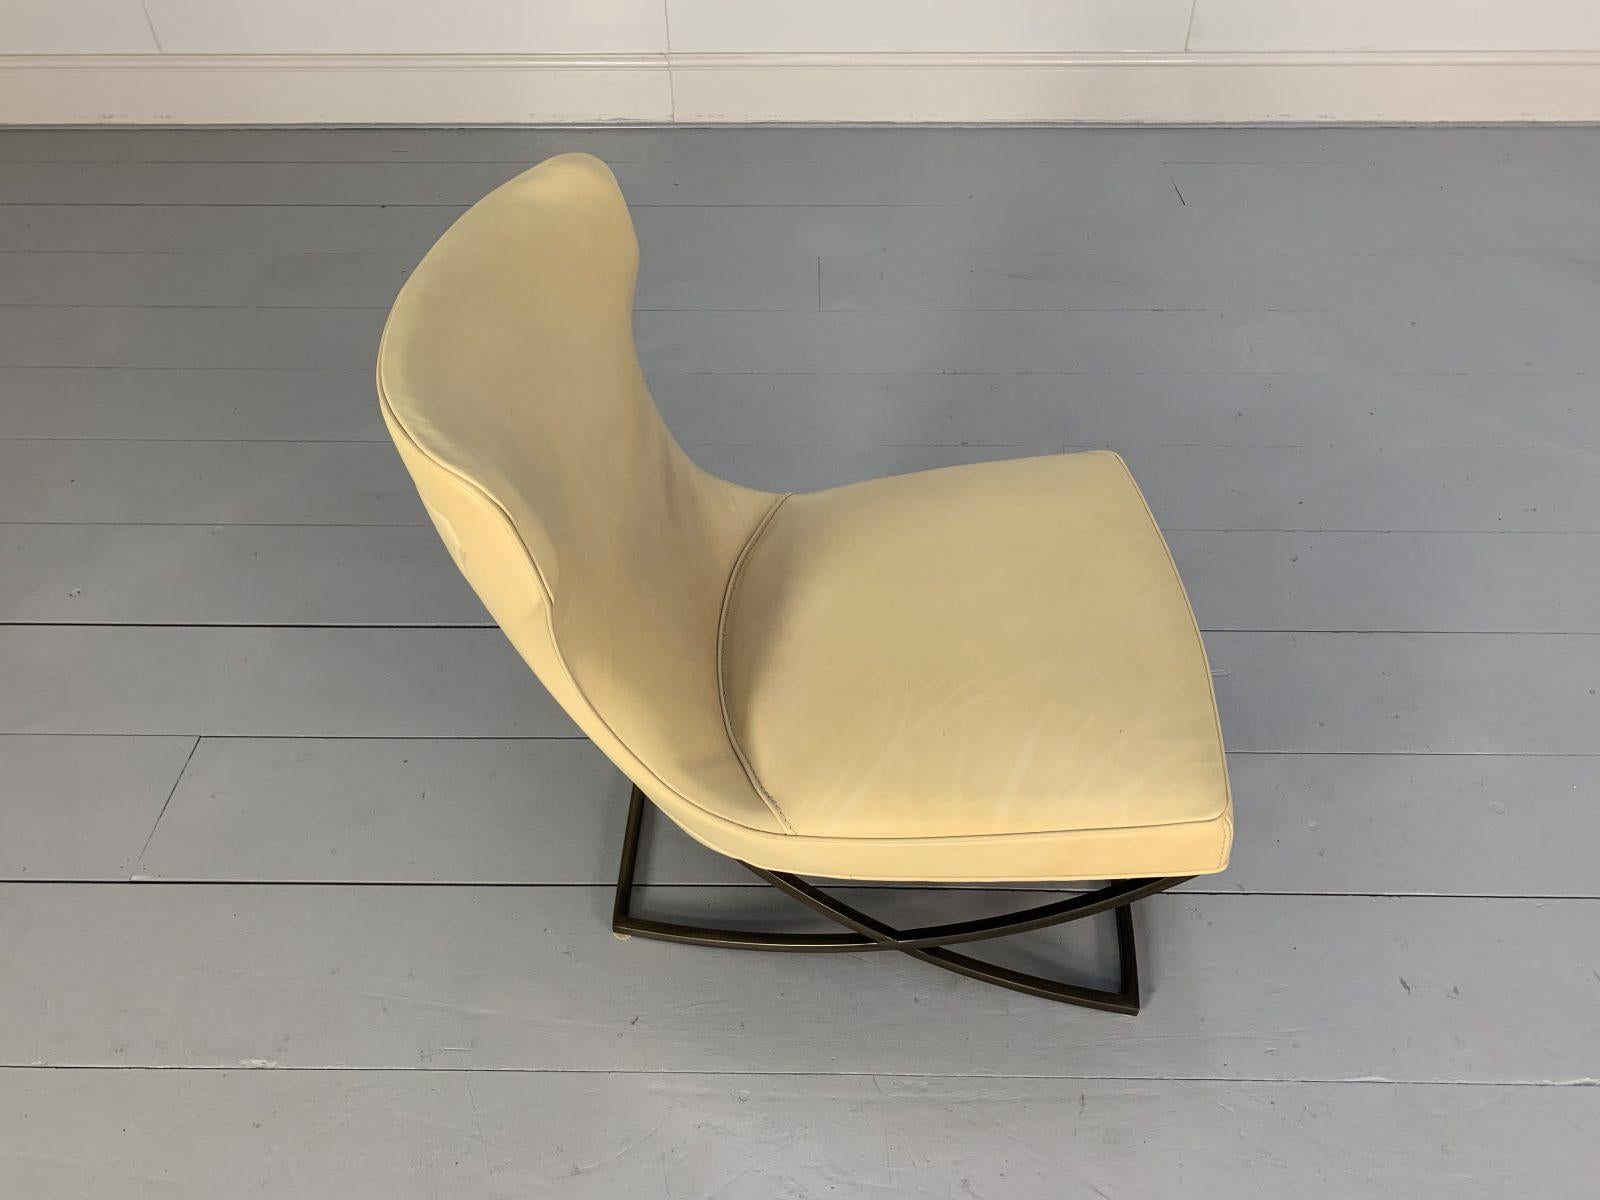 Pair of Baxter “Paloma” Chairs, in Cream Leather For Sale 7